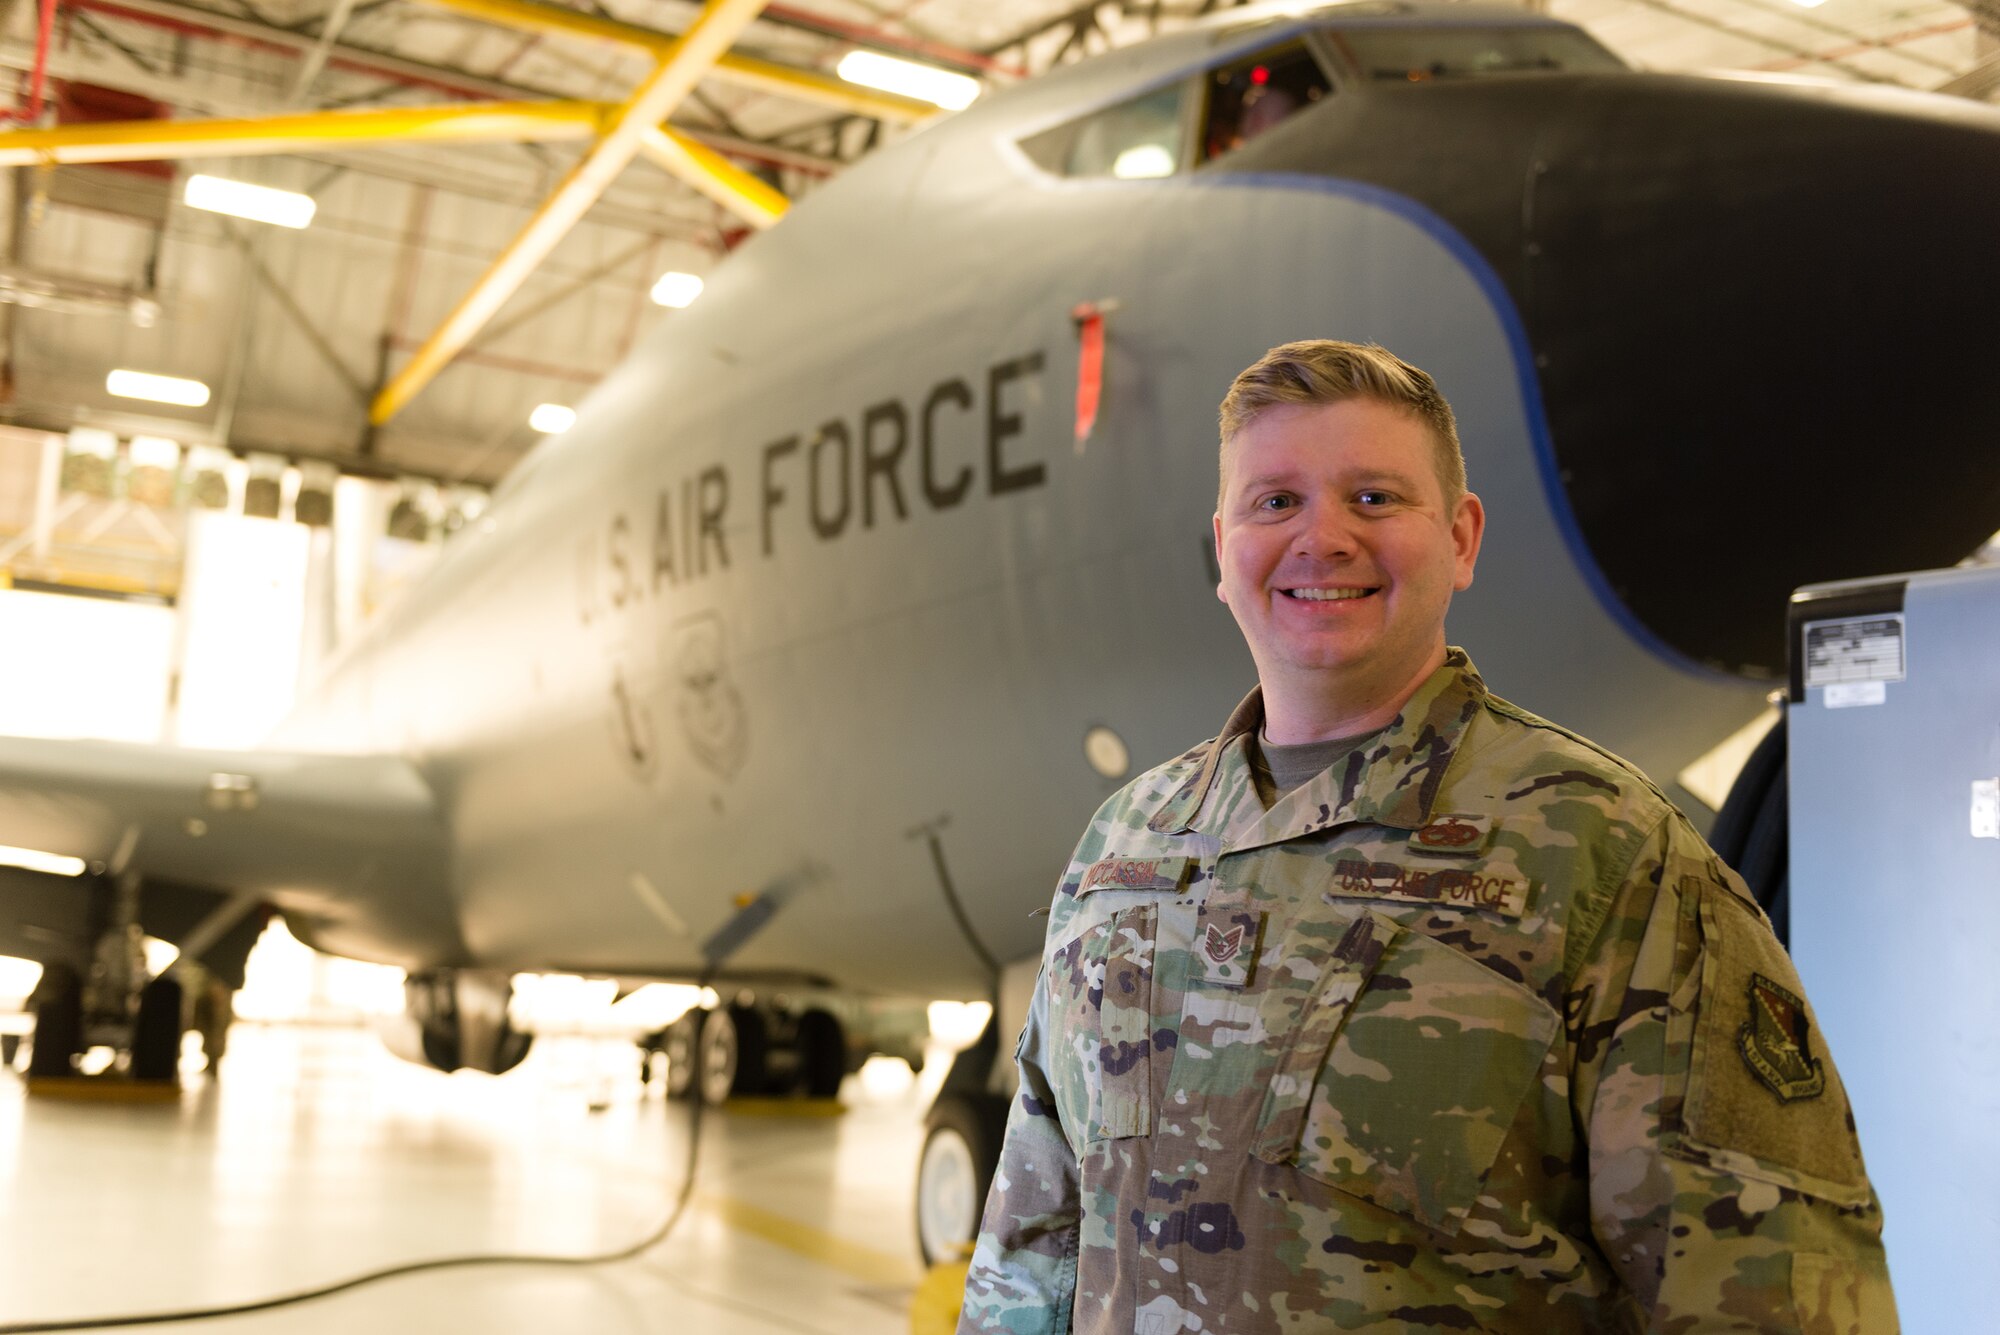 U.S. Air Force Tech. Sgt. Mark McCassin, assigned to the 157th Maintenance Squadron, New Hampshire Air National Guard, stands in front of a KC-135R Stratotanker, Jan. 31, 2019, at Pease Air National Guard Base, N.H. McCassin is the crew chief assigned to tanker serial number 57-1419, the oldest aircraft in the U.S. Air Force inventory.